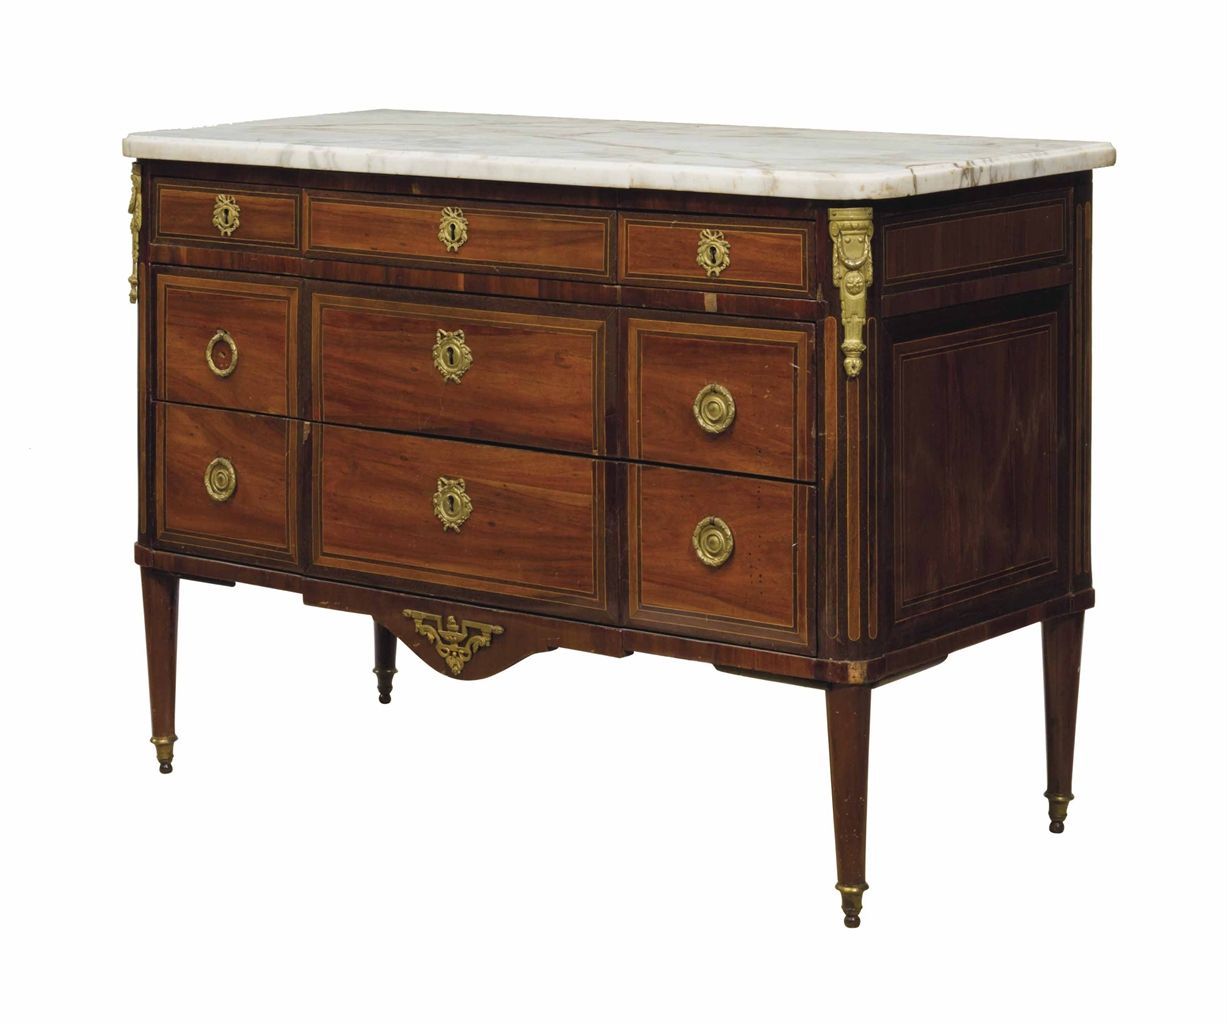 1980s Louis Xvi Style Chest Of Drawers | Products Intended For Most Popular Adkins Sideboards (View 17 of 20)